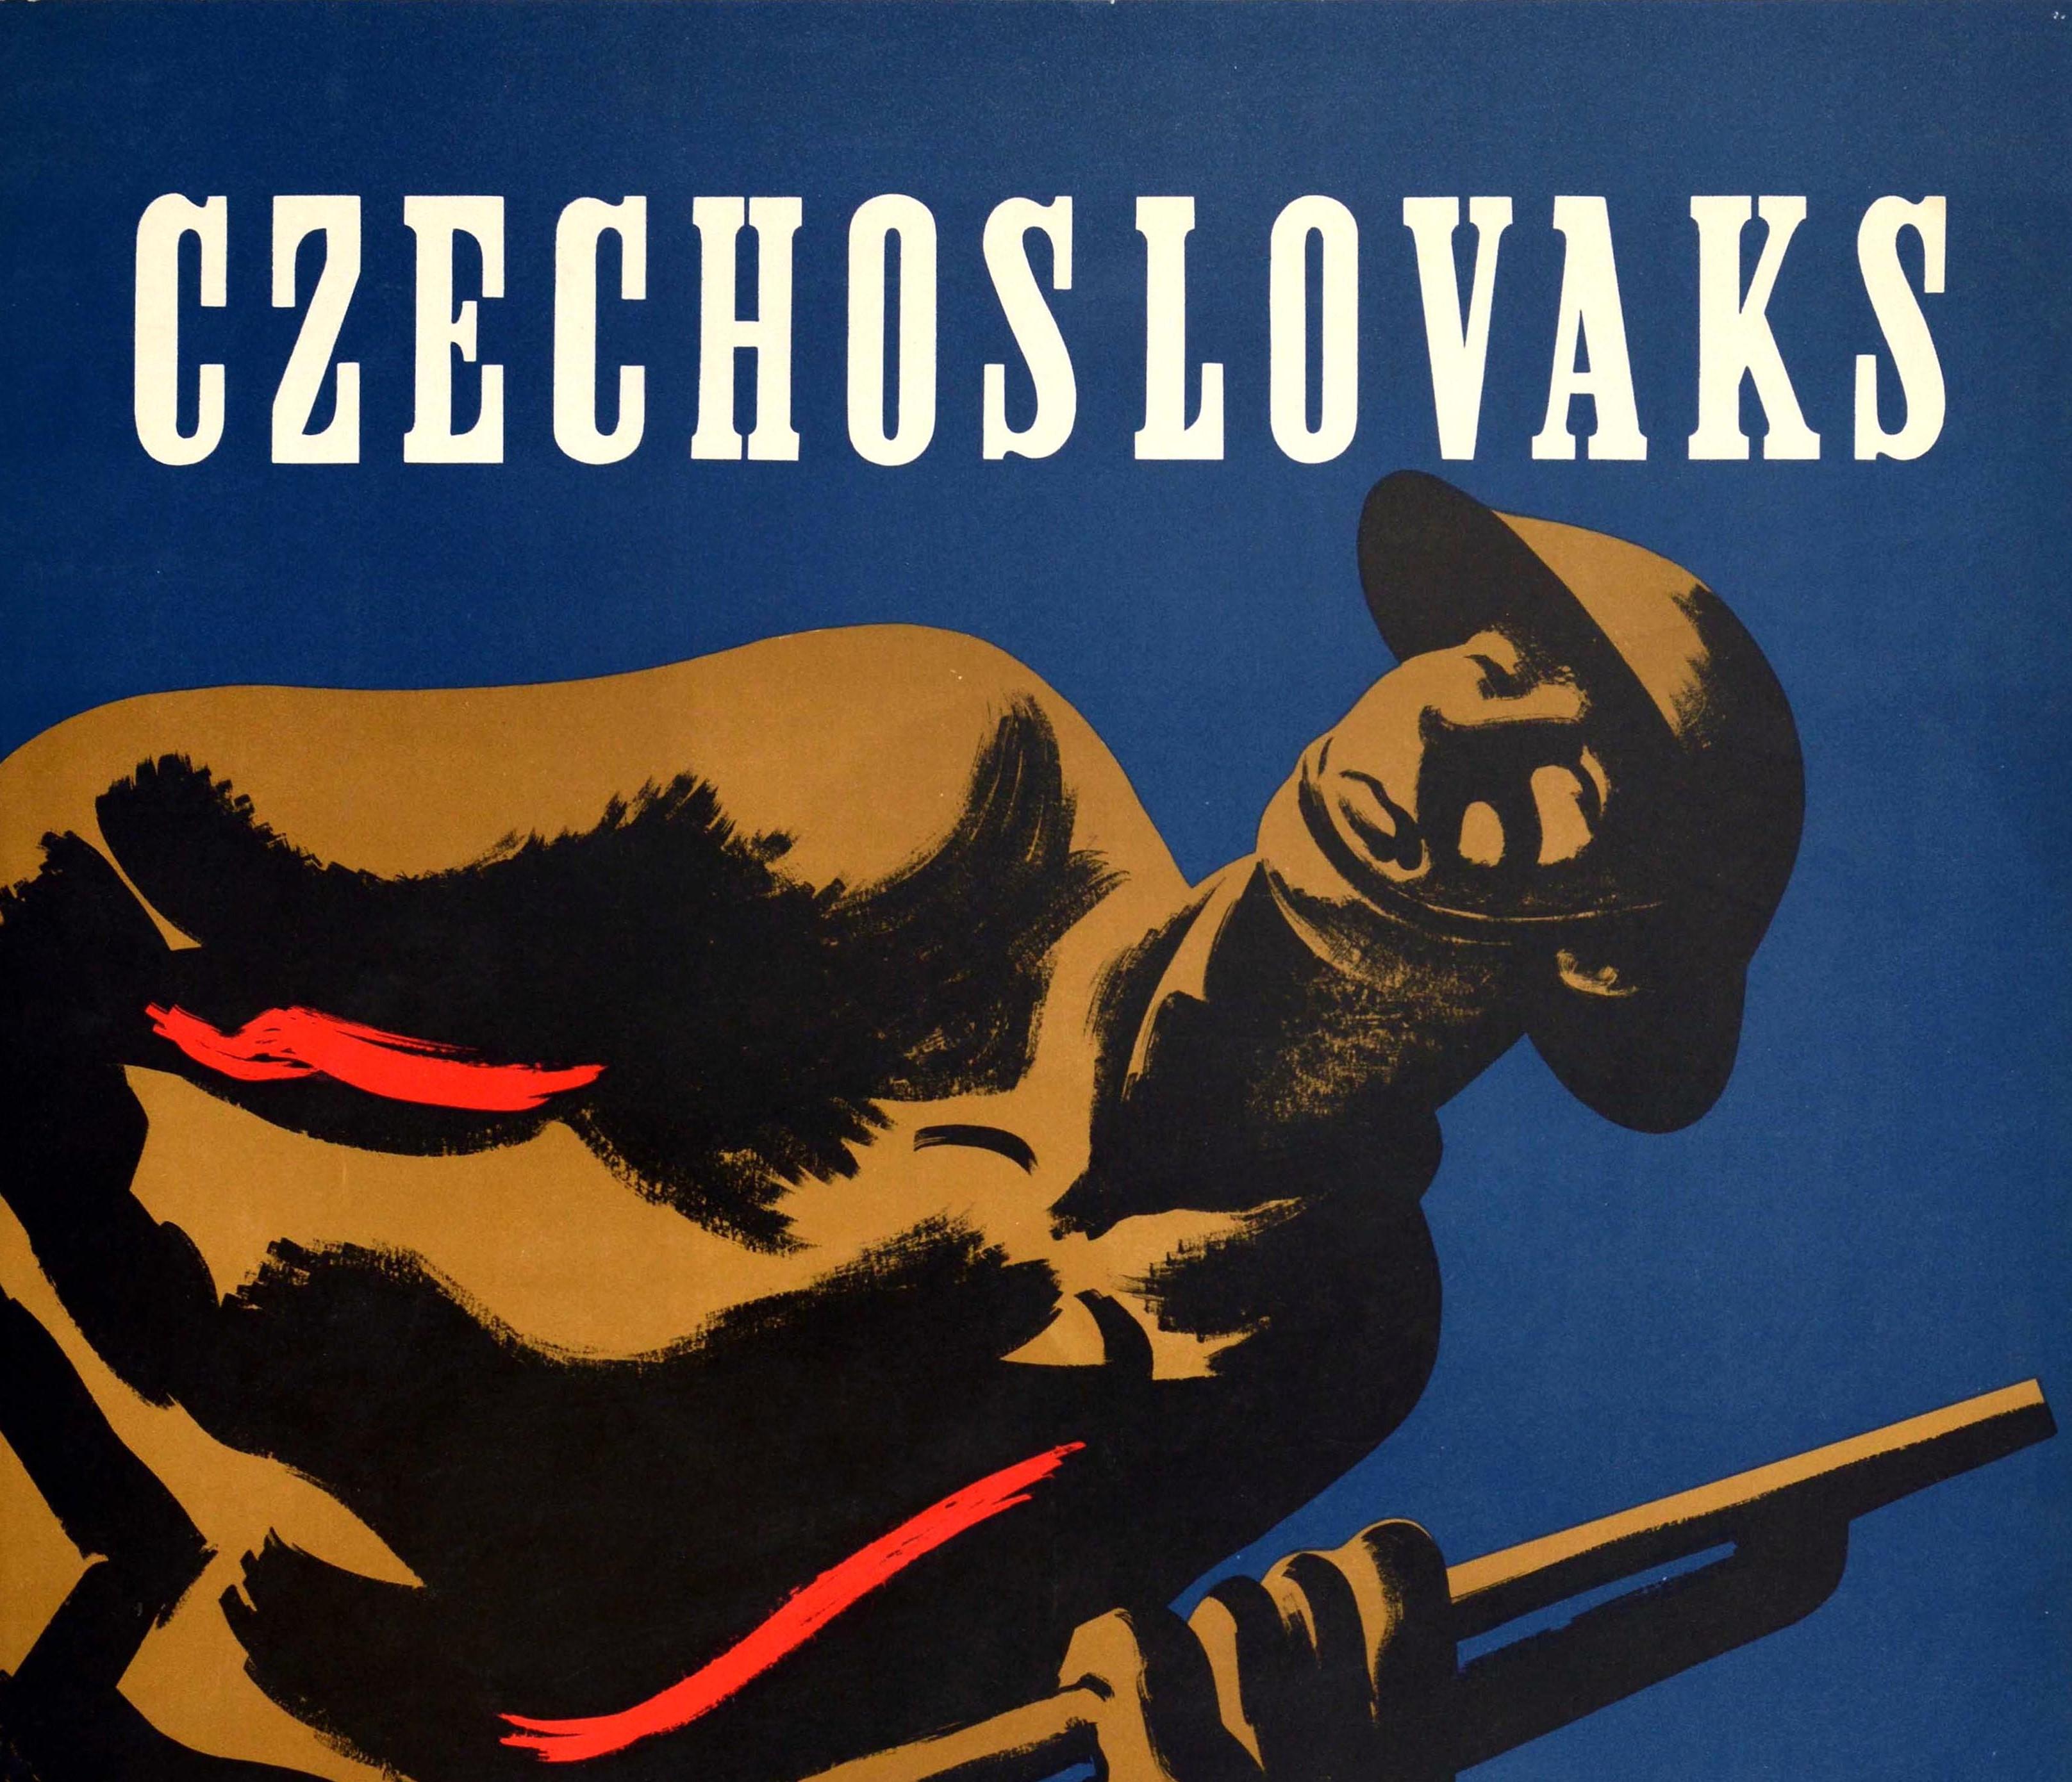 Original Vintage Poster Czechoslovaks Carry On WWII Soldiers Army Flags War Art - Print by T. Peel